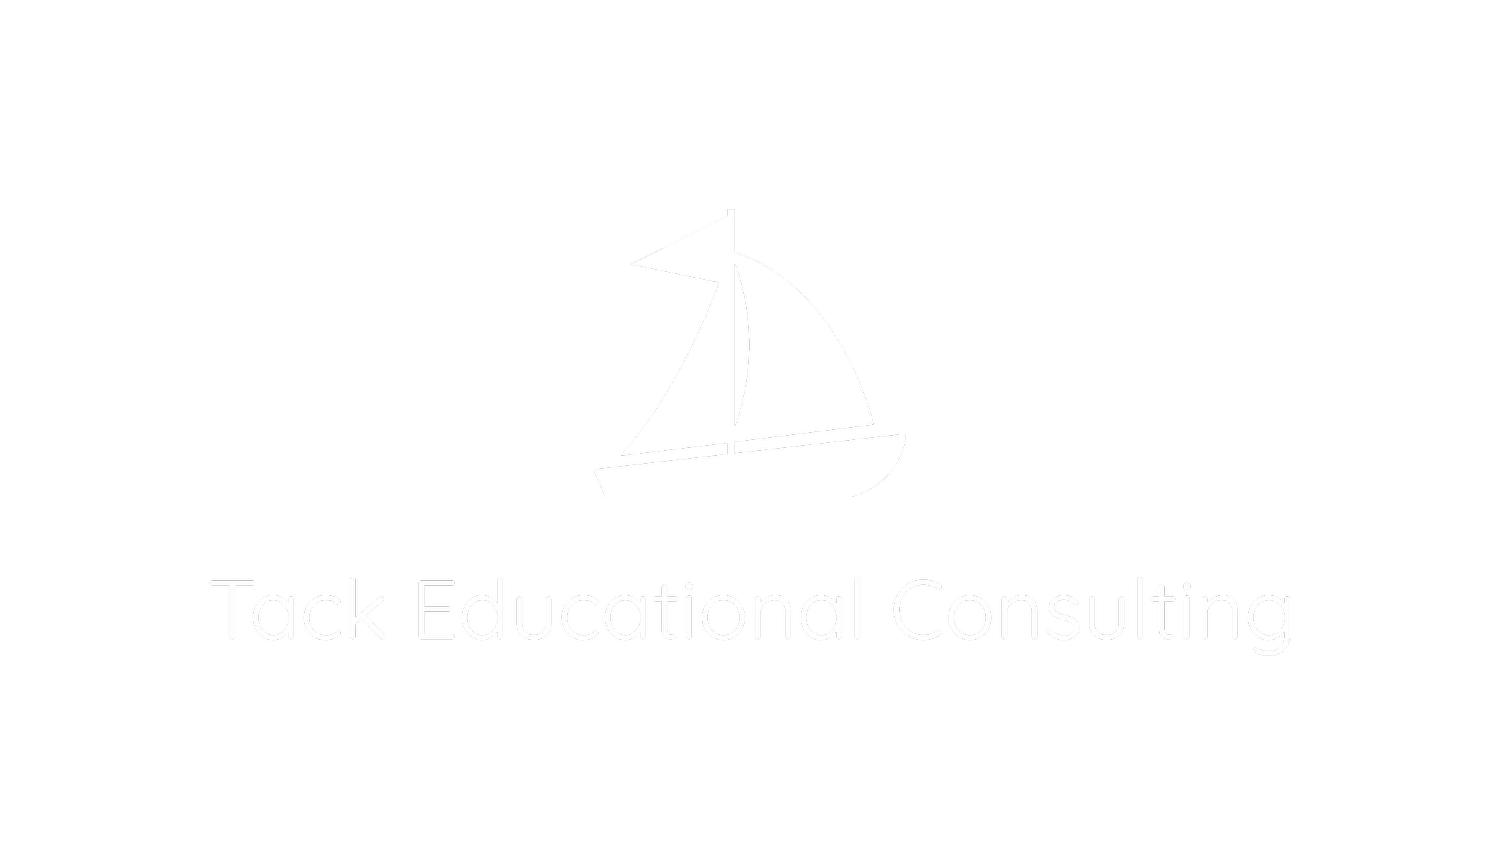 Tack Educational Consulting